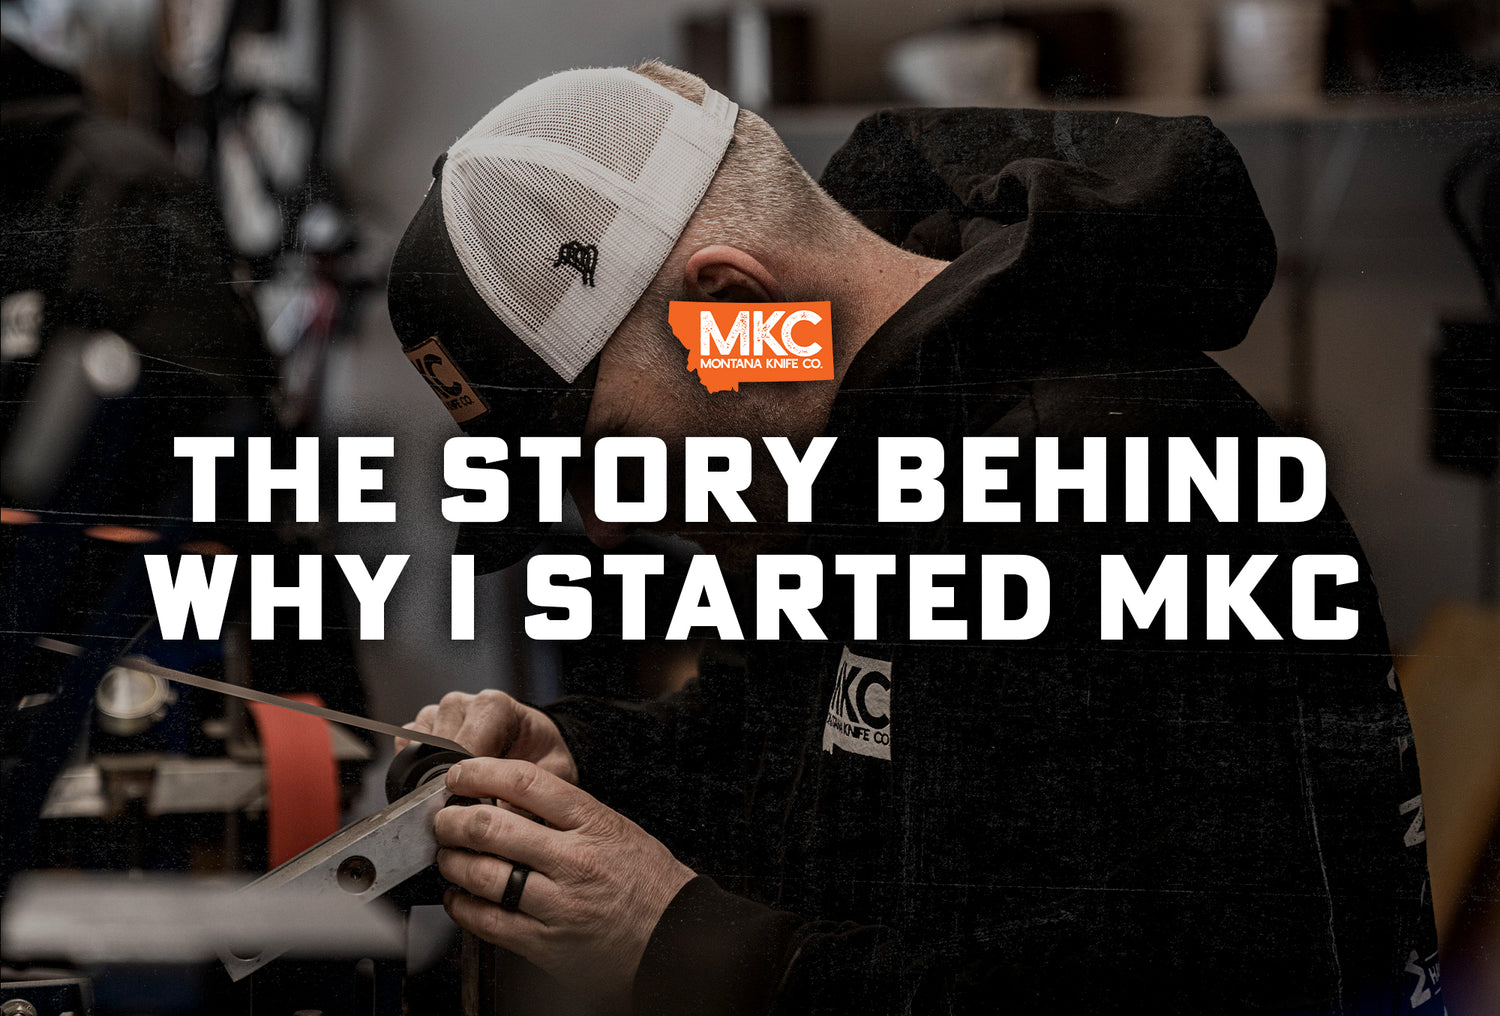 The Story Behind Why I Started MKC